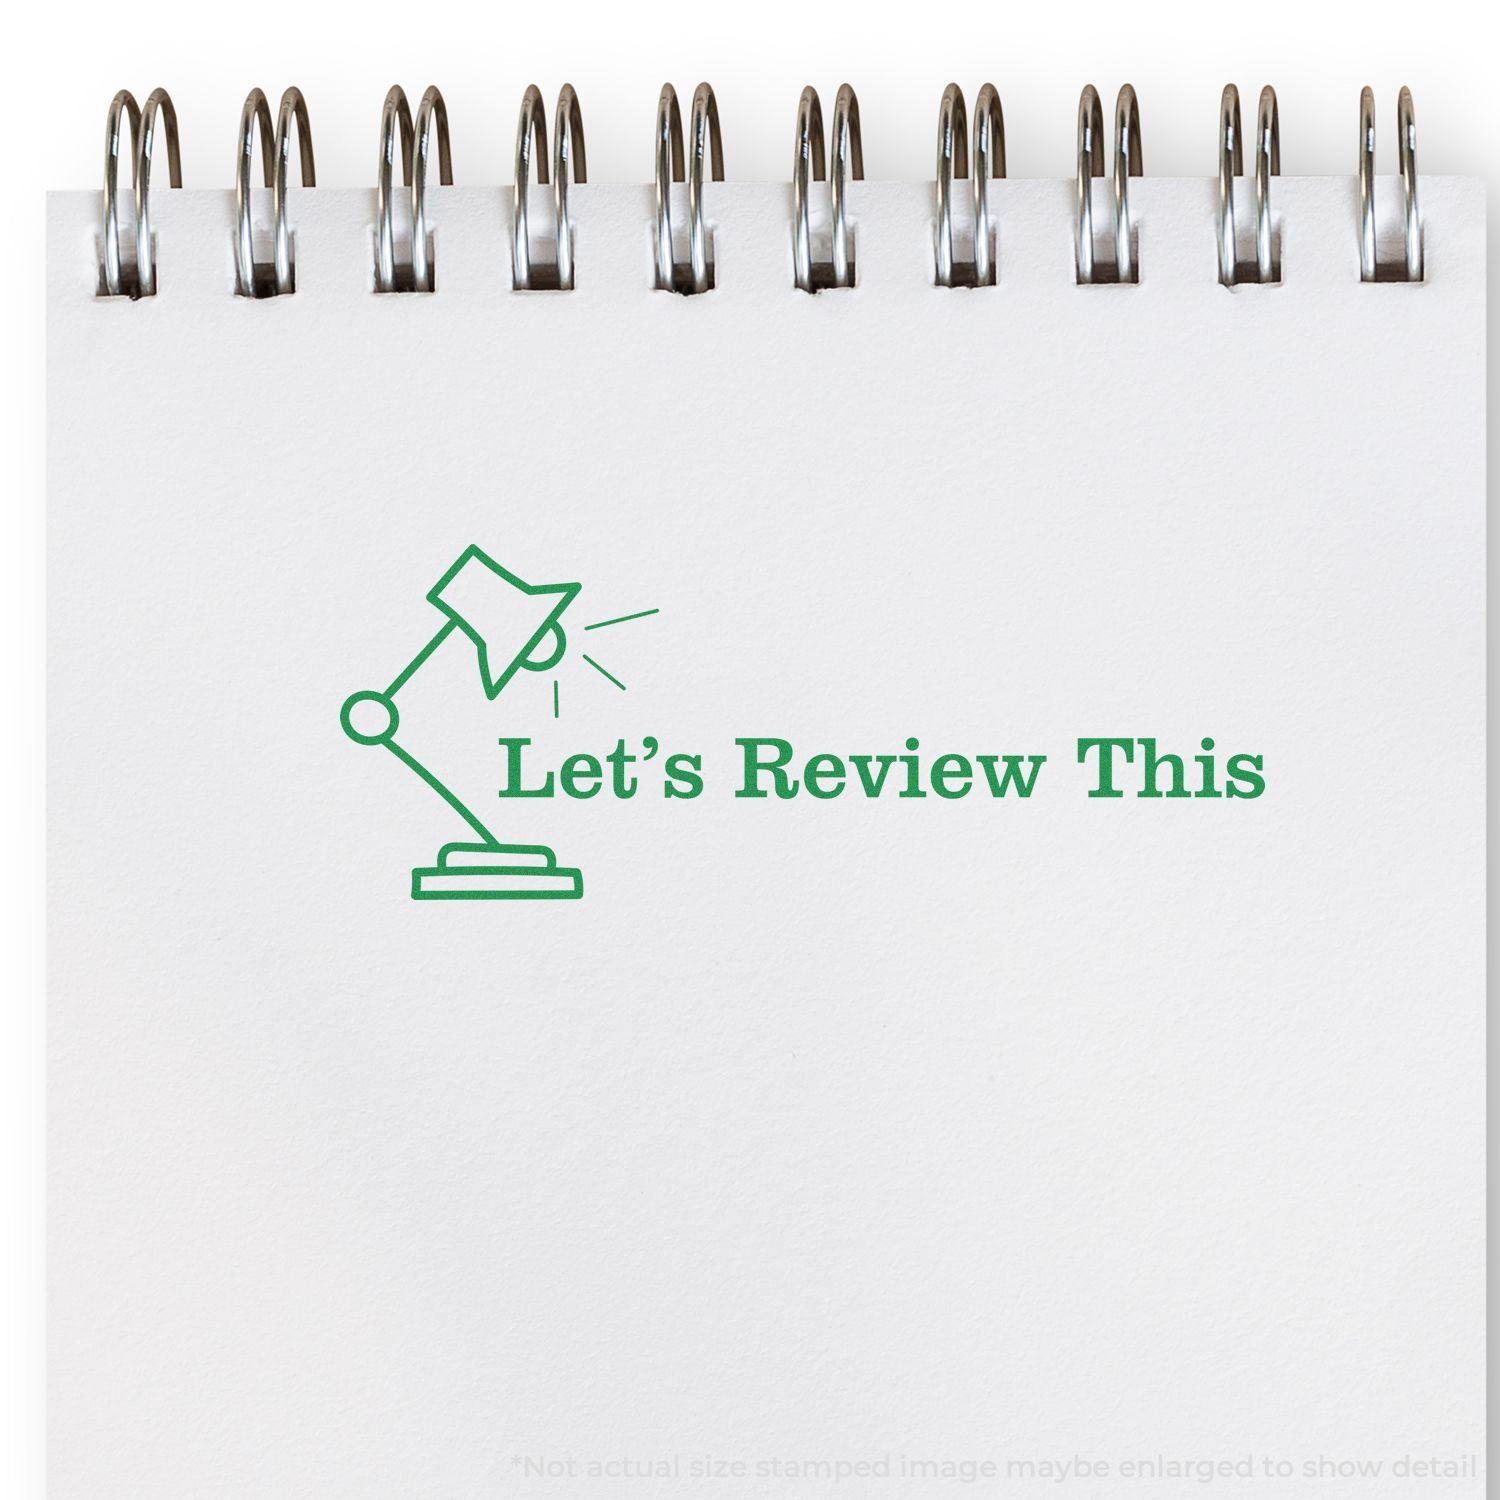 A stock office rubber stamp with a stamped image showing how the text "Let's Review This" in a large bold font with the image of a lamp is displayed after stamping.